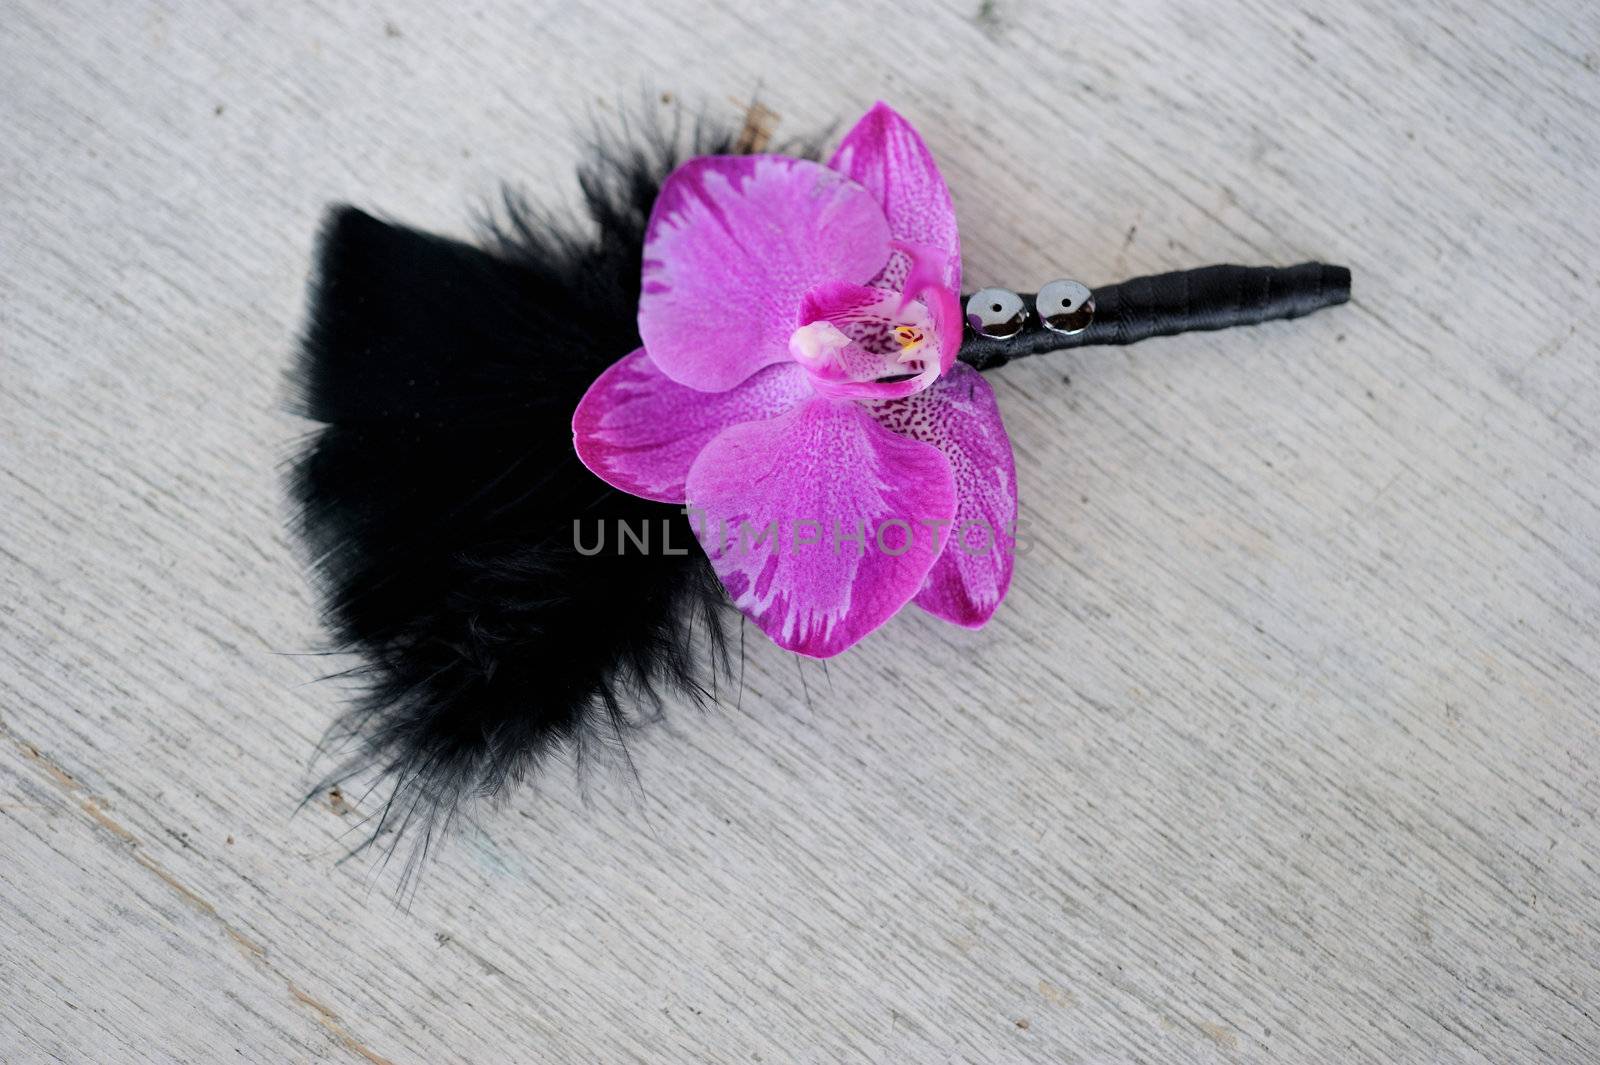 Image of a creatively designed  boutonniere